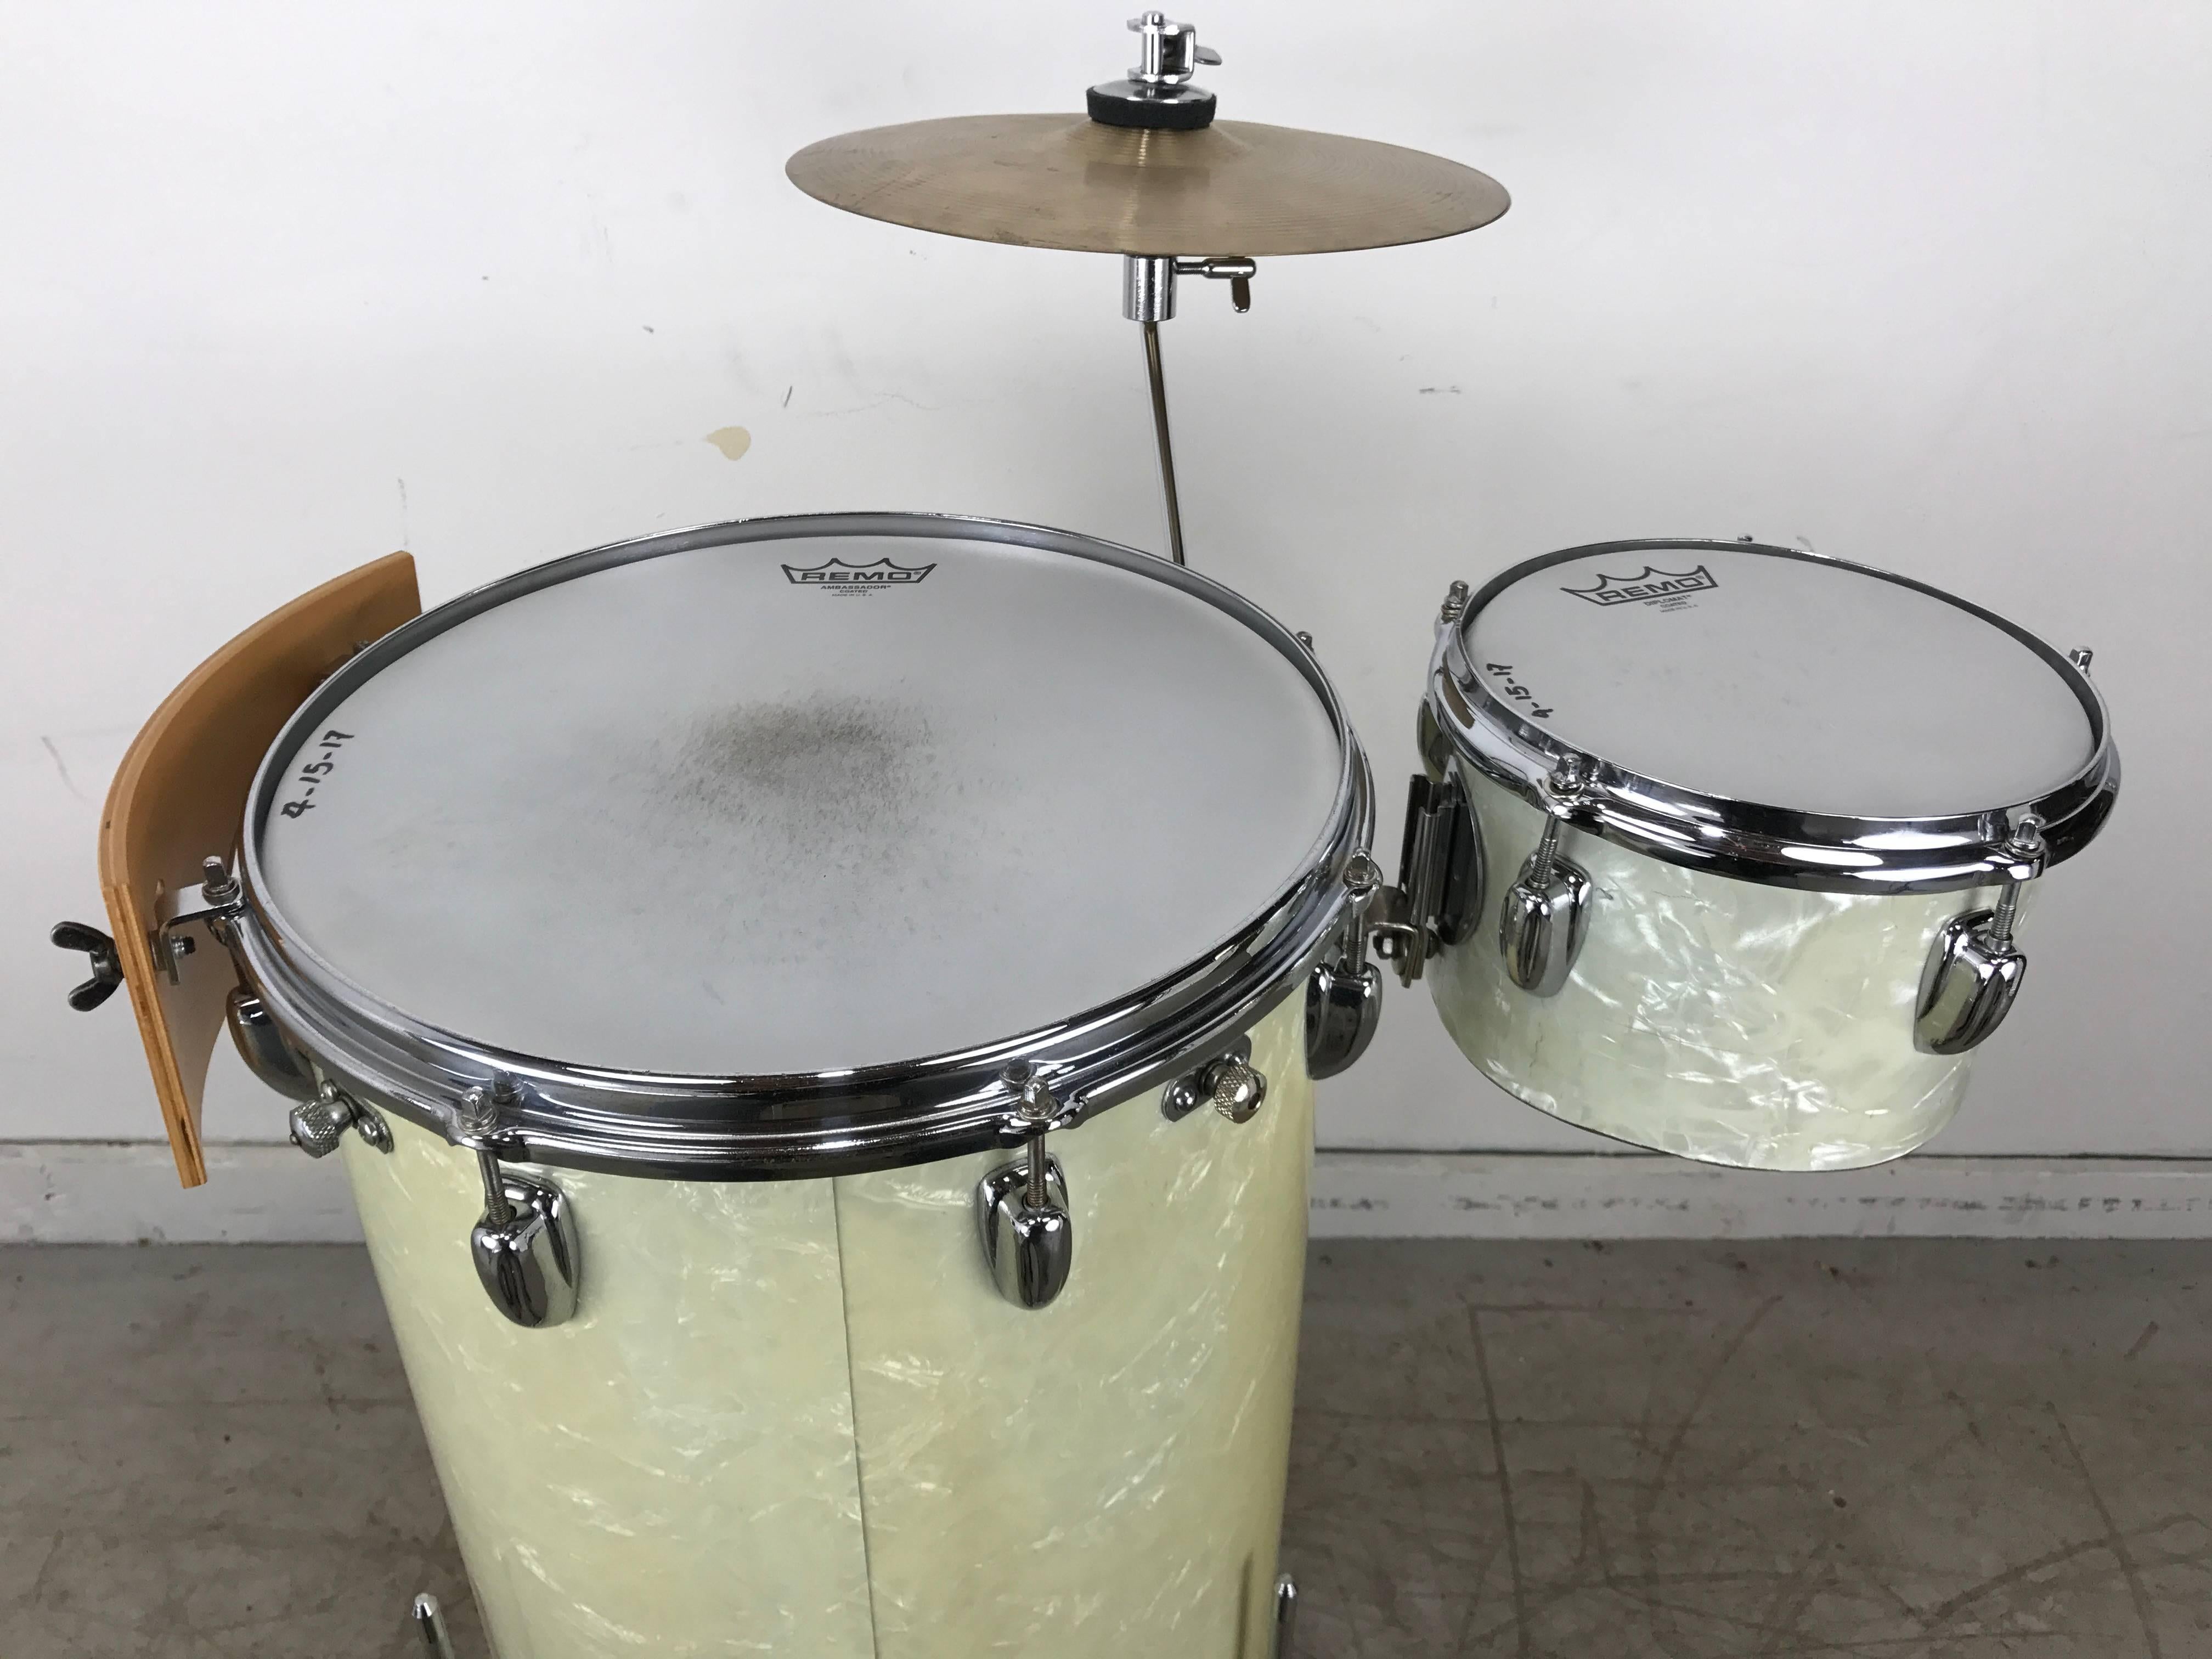 1960s slingerland white pearl cocktail kit drum set. Fully restored. Amazing sound, replaced pearl brand reverse foot pedal. New Yamaha Cascara Wedge as well as newer hi-hat cymbals added, Classic Mid-Century Modern design.